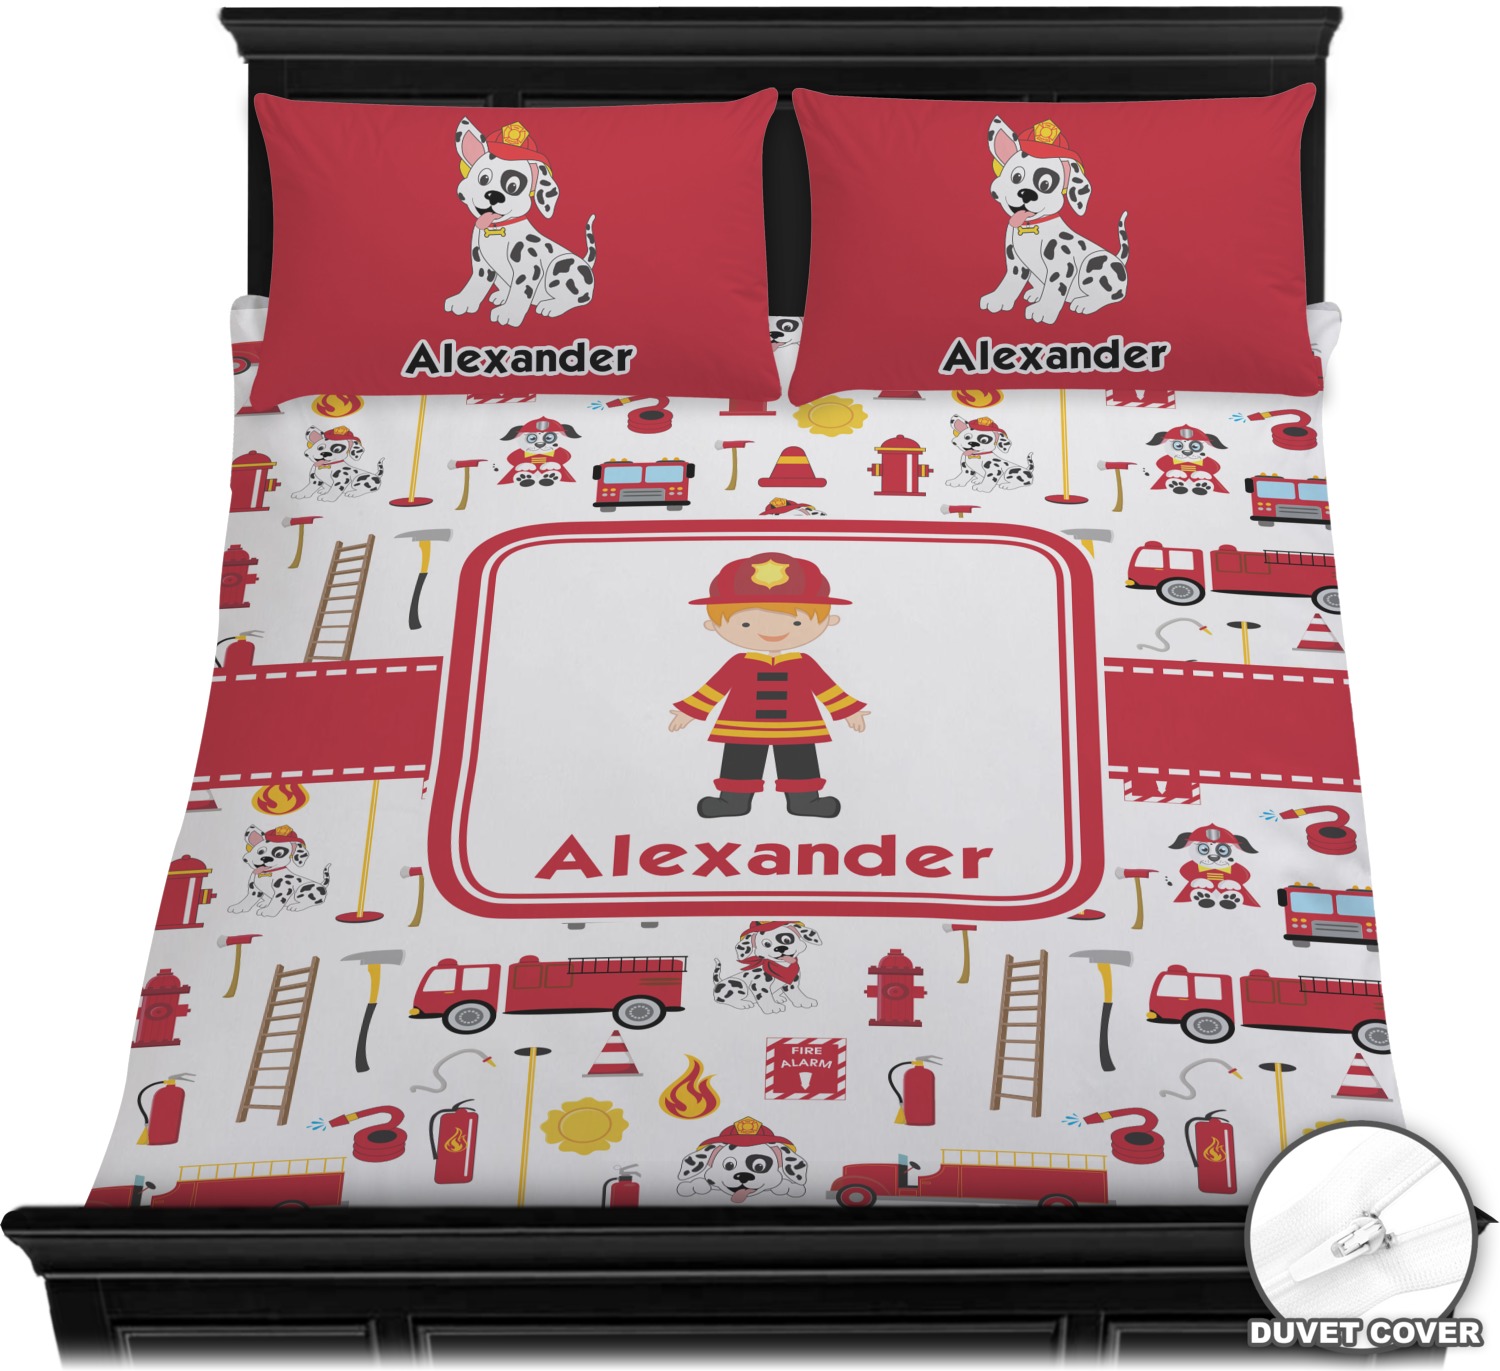 Firefighter For Kids Duvet Covers Personalized Youcustomizeit